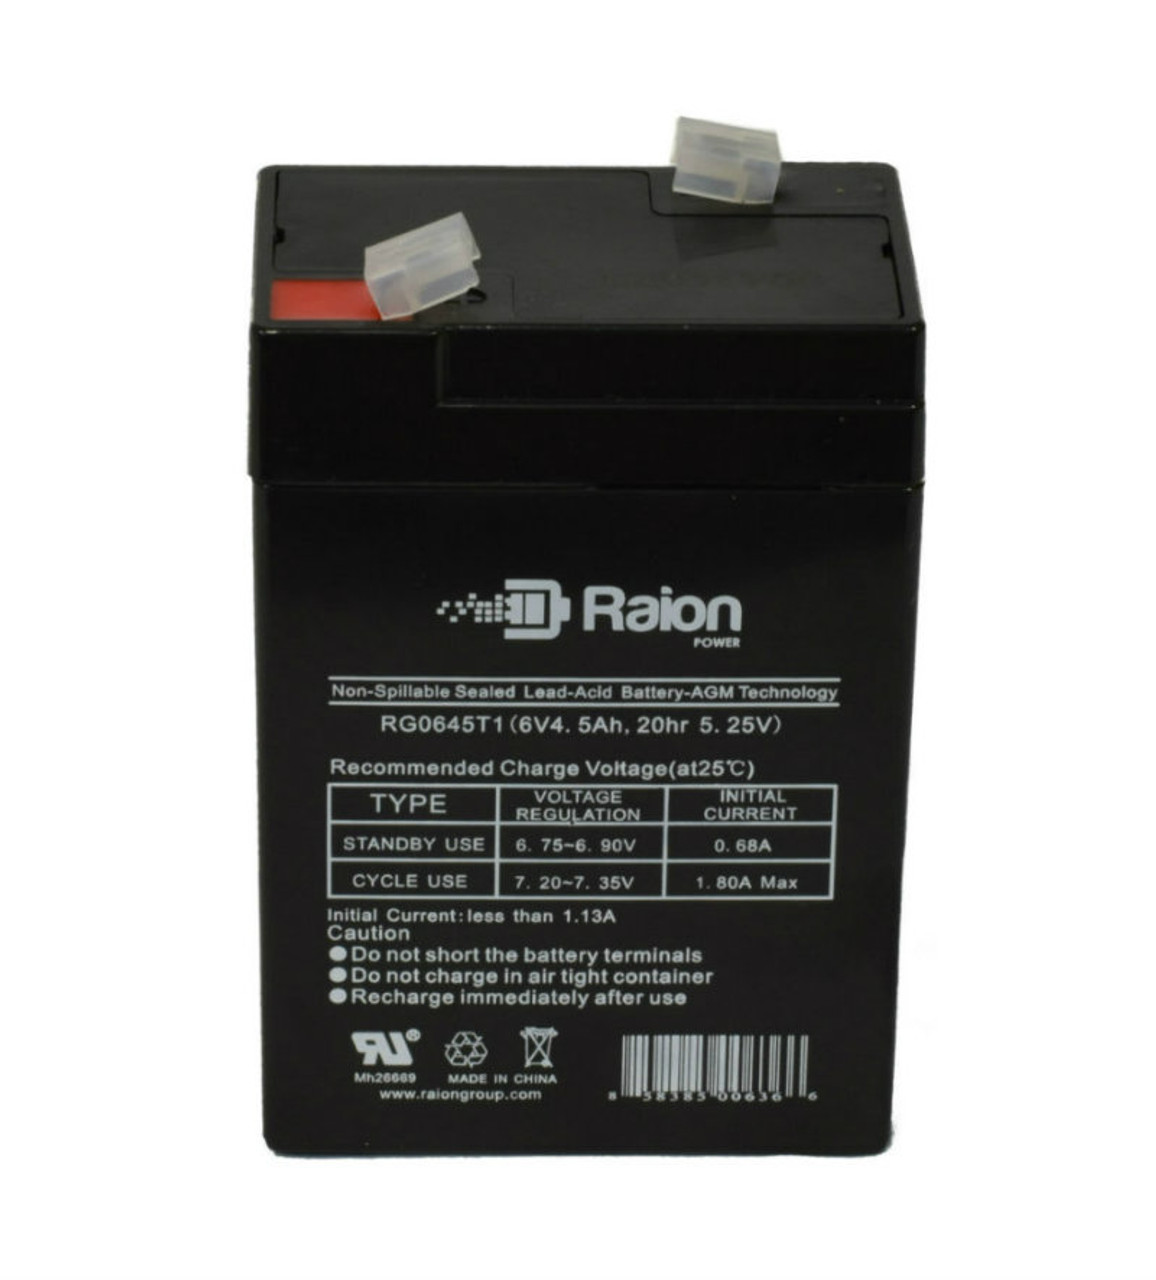 Raion Power RG0645T1 Replacement Battery Cartridge for National Power Corporation GS012PS